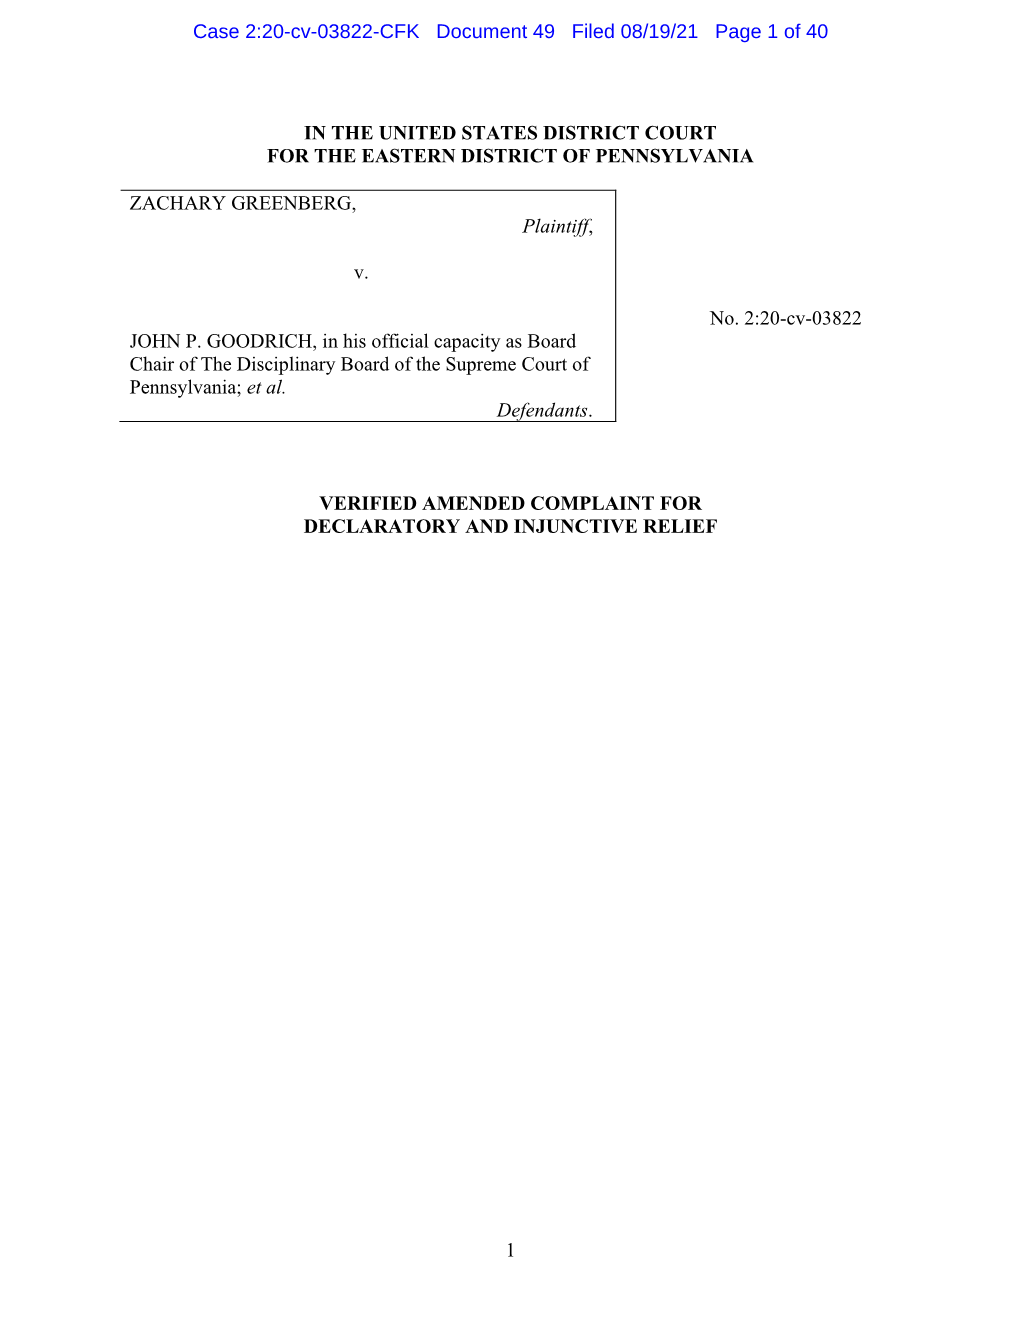 Case 2:20-Cv-03822-CFK Document 49 Filed 08/19/21 Page 1 of 40